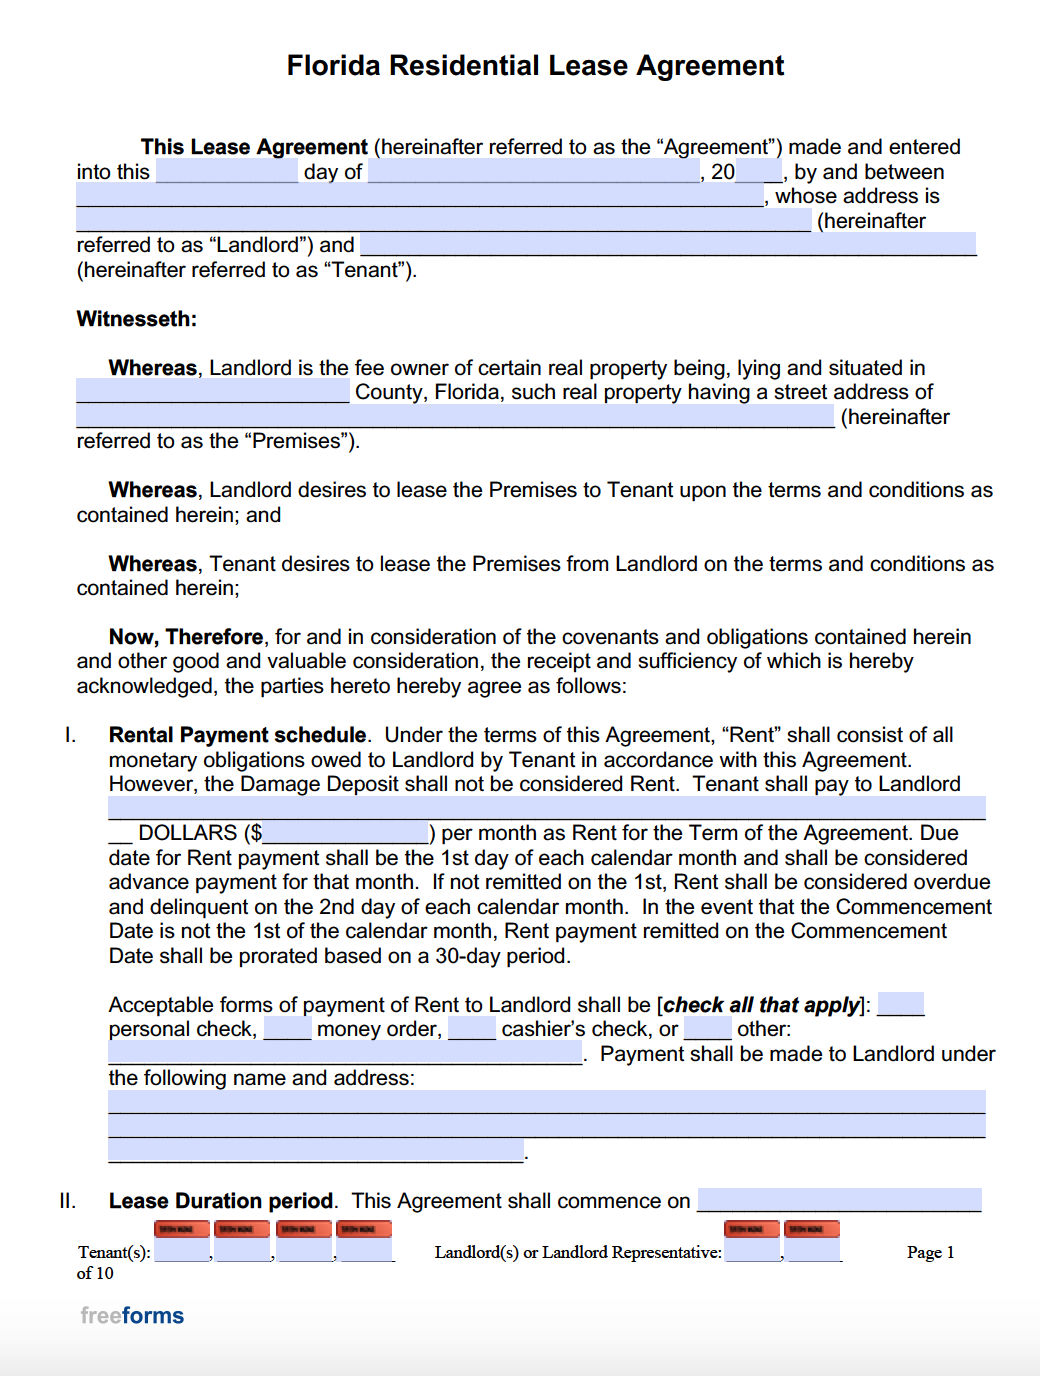 Free florida residential lease agreement form download get autocad